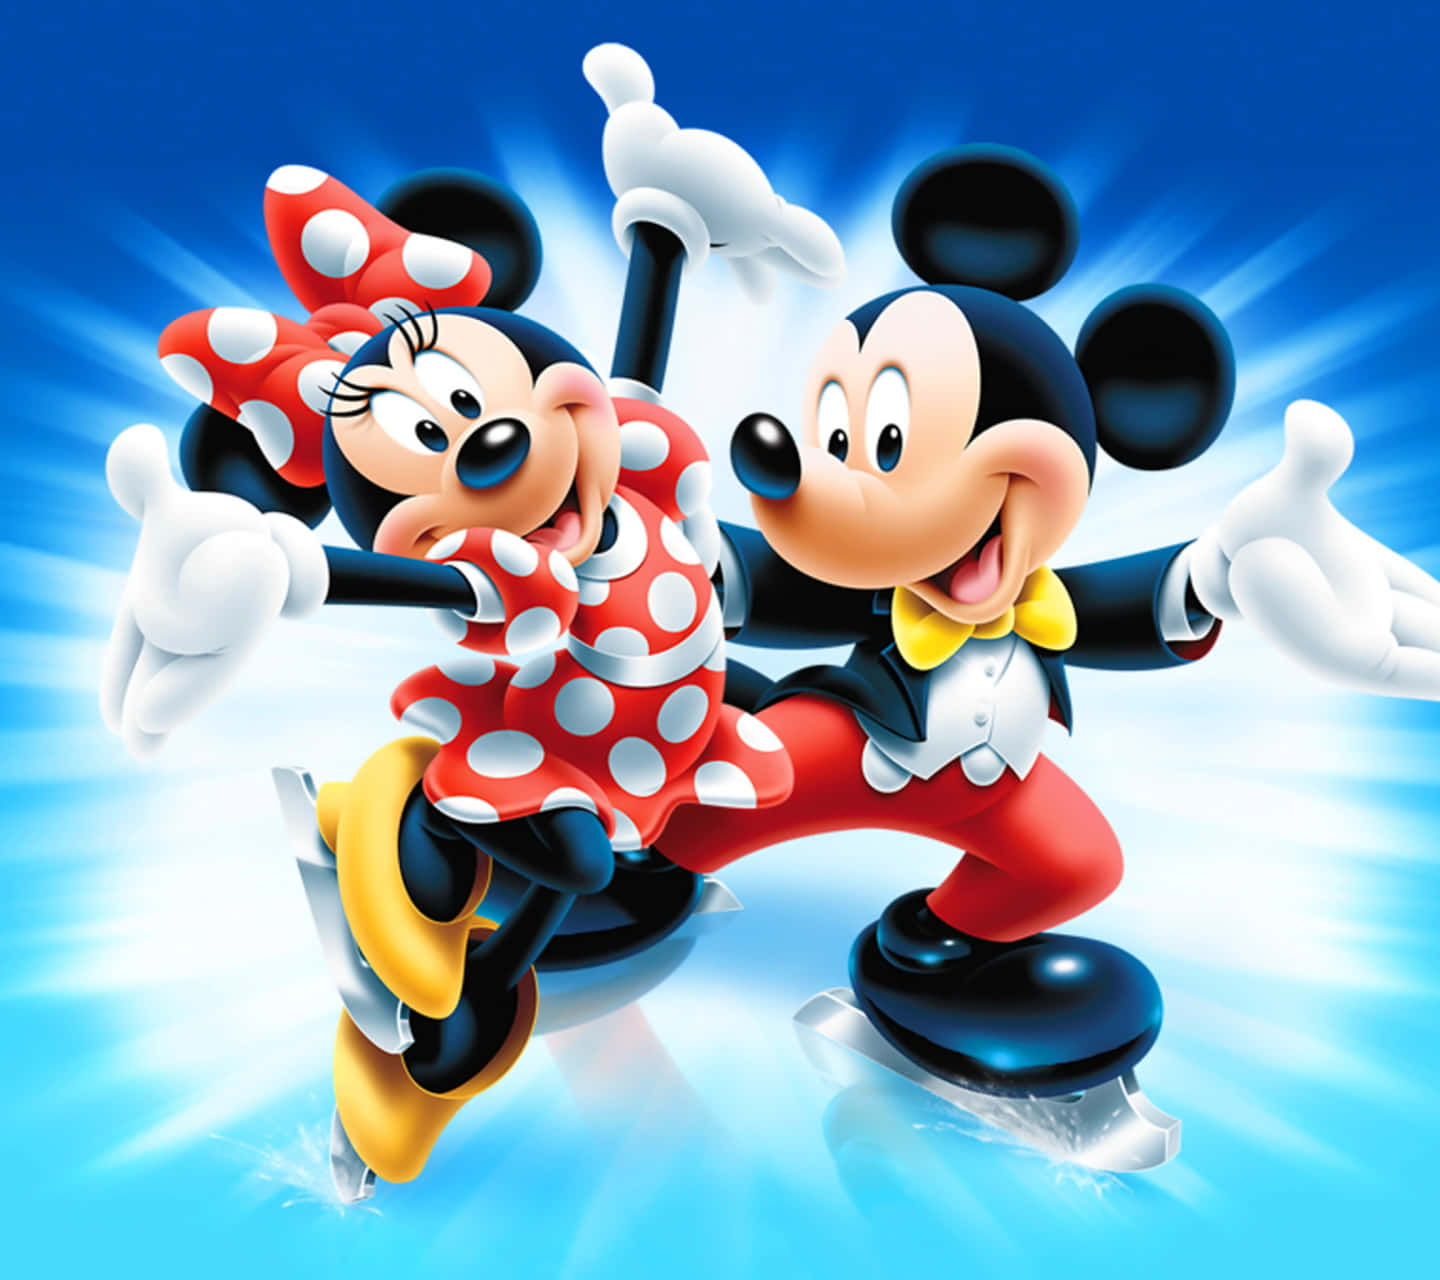 Welcome the New Year with Mickey Mouse Wallpaper